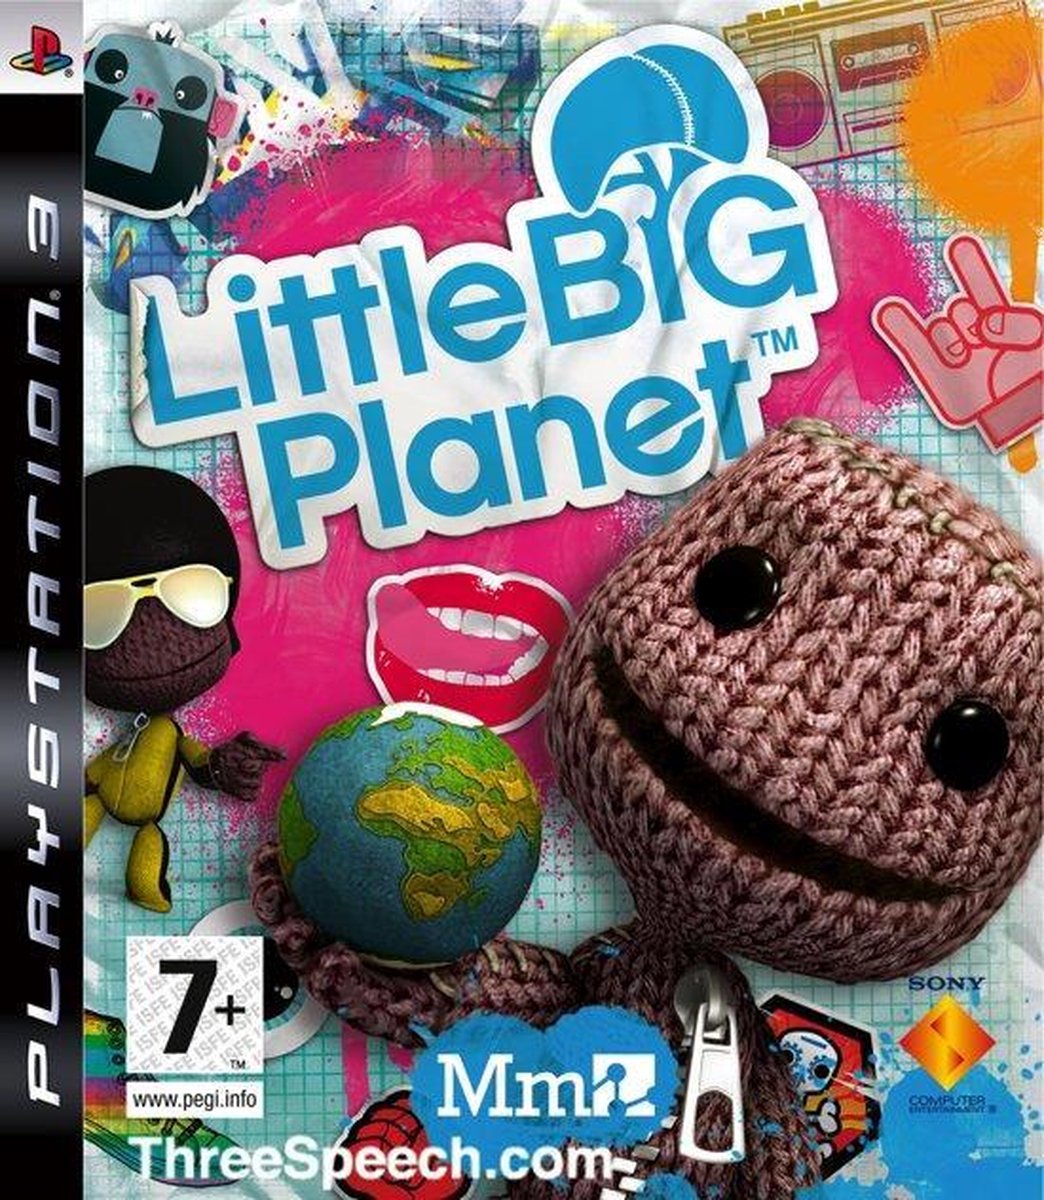 Little Big Planet - Essentials Edition - PS3 - Sony Playstation